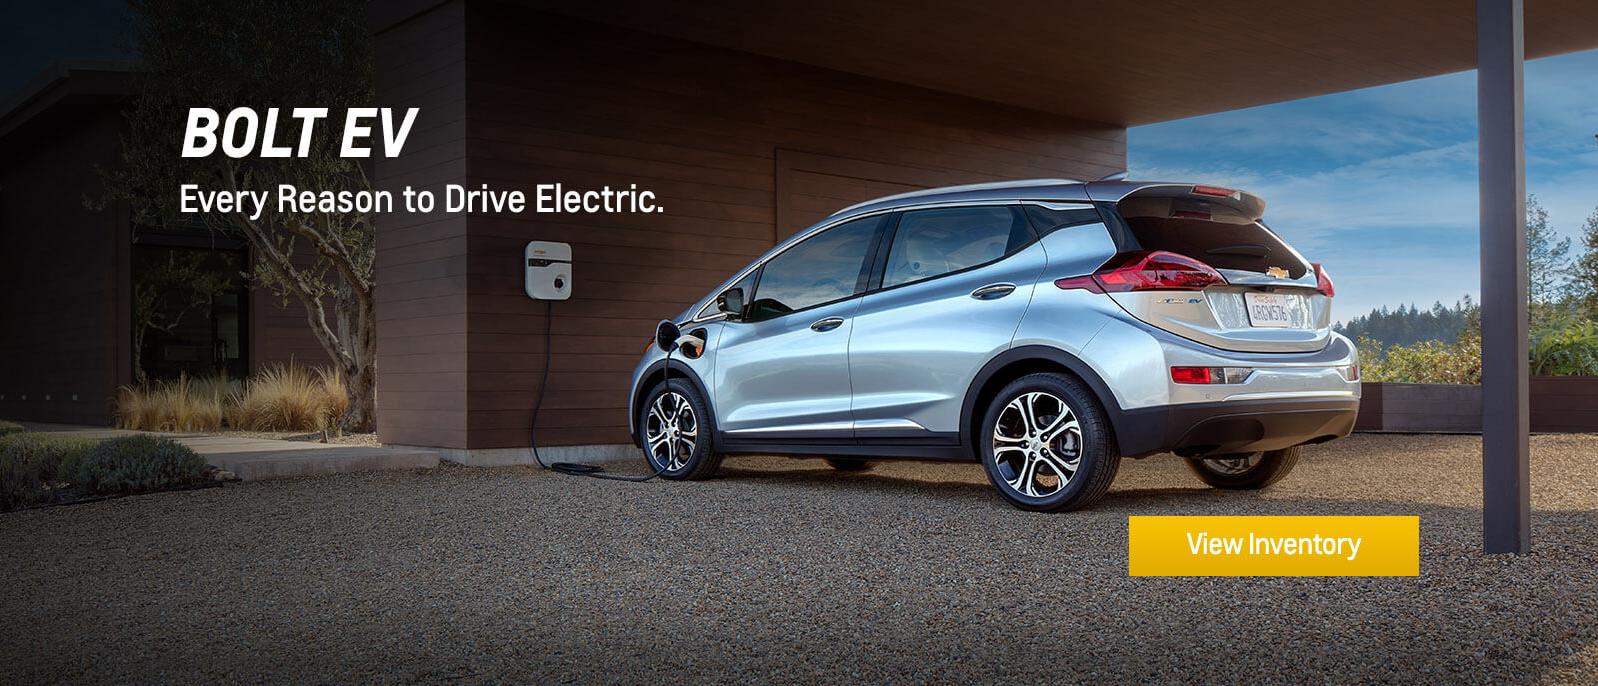 Every Reason to Drive Electric.